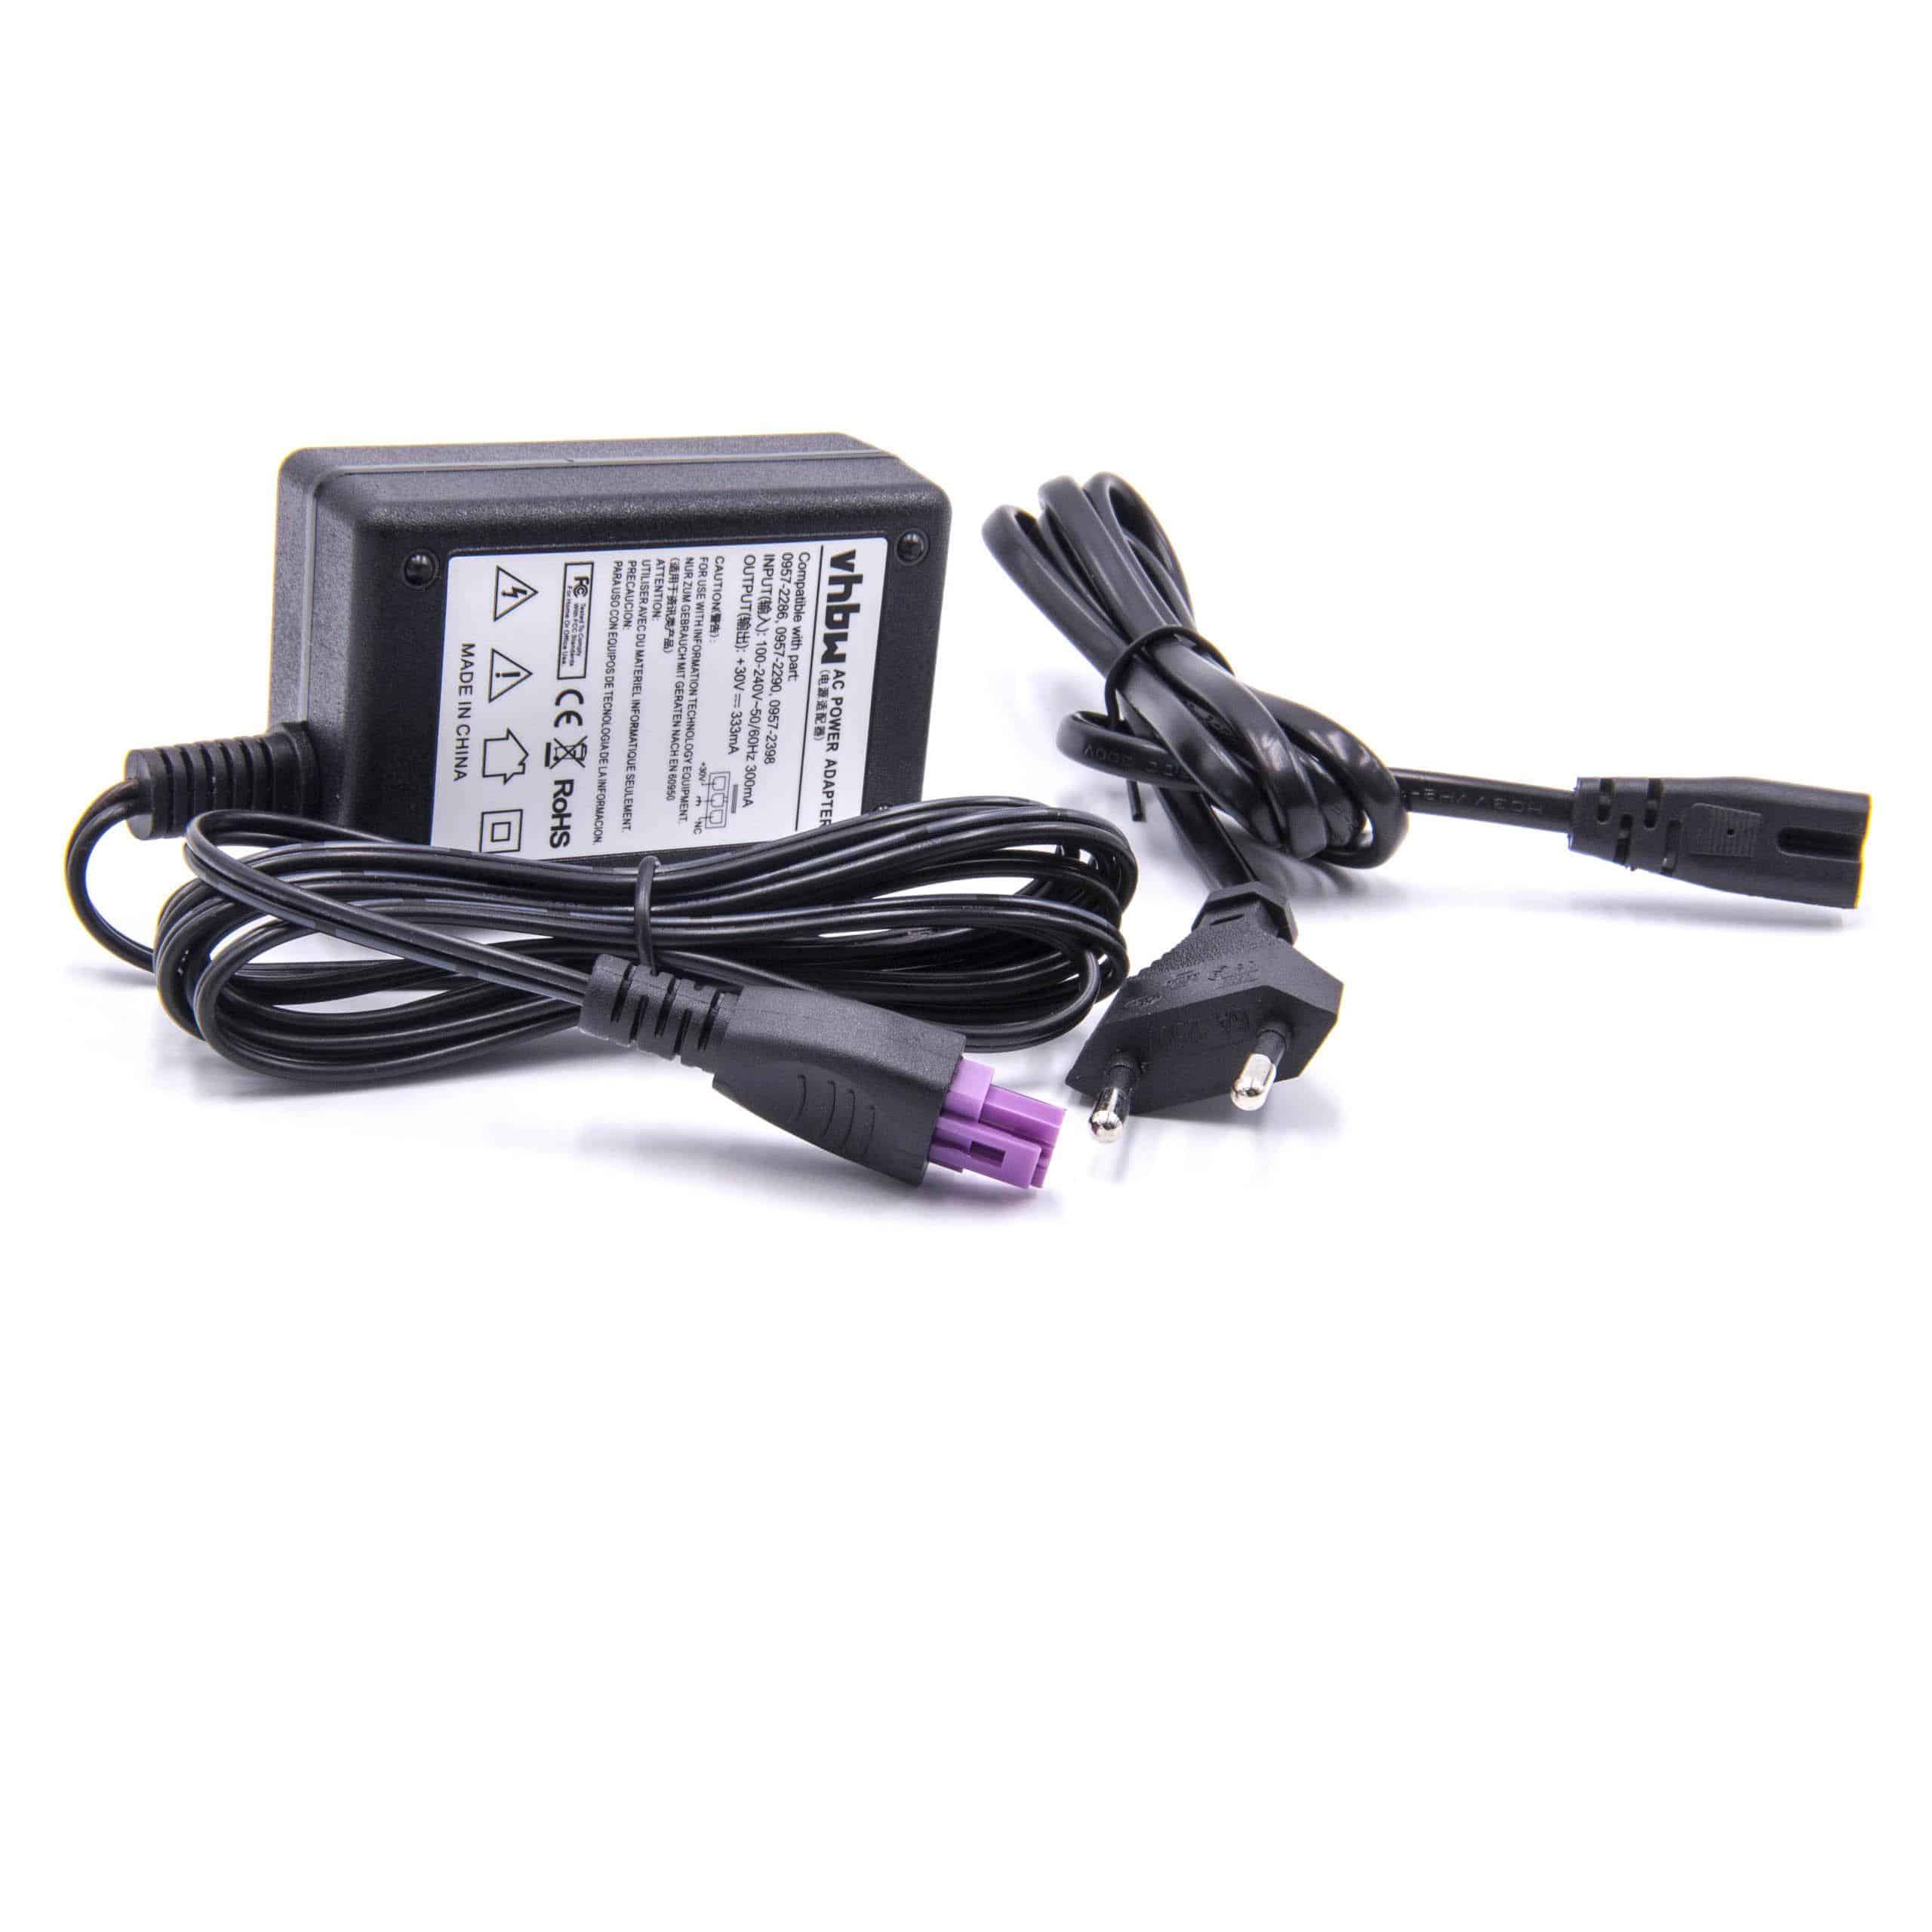 Mains Power Adapter replaces HP 0957-2286 for Printer